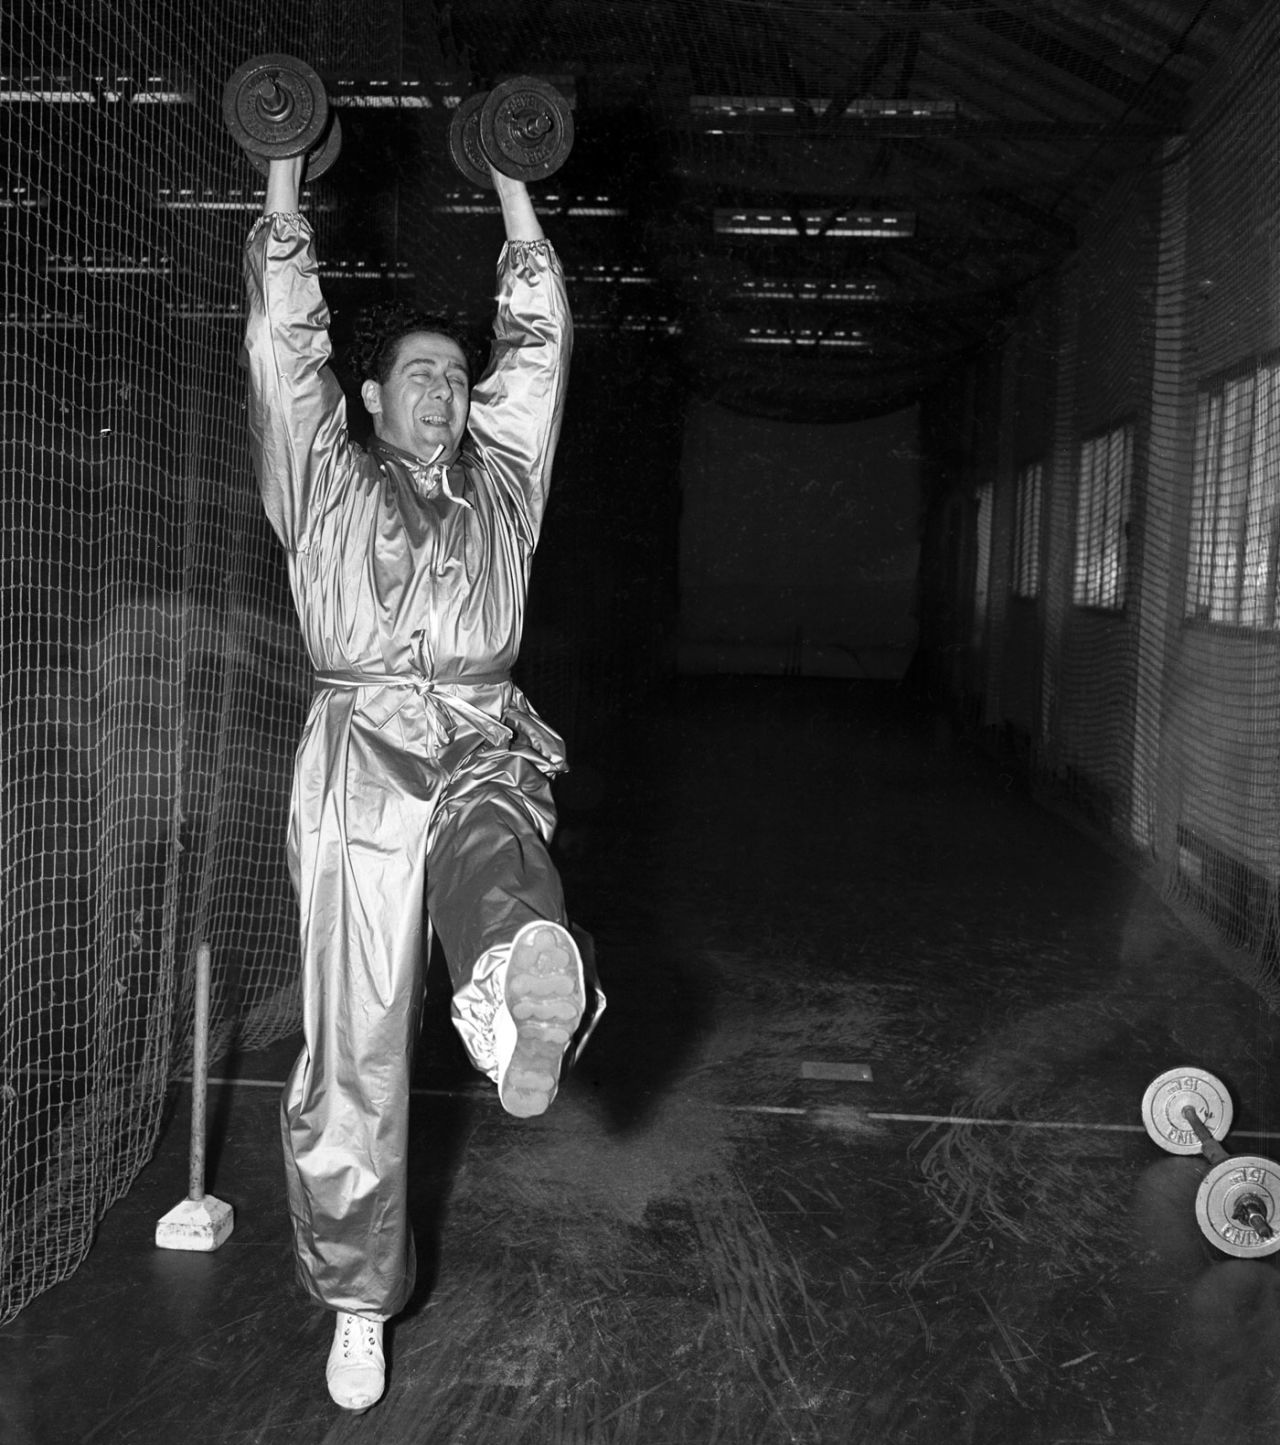 Trevor Bailey exercises while wearing a high-grade plastic sweatsuit designed to help him reduce weight, March 19, 1958